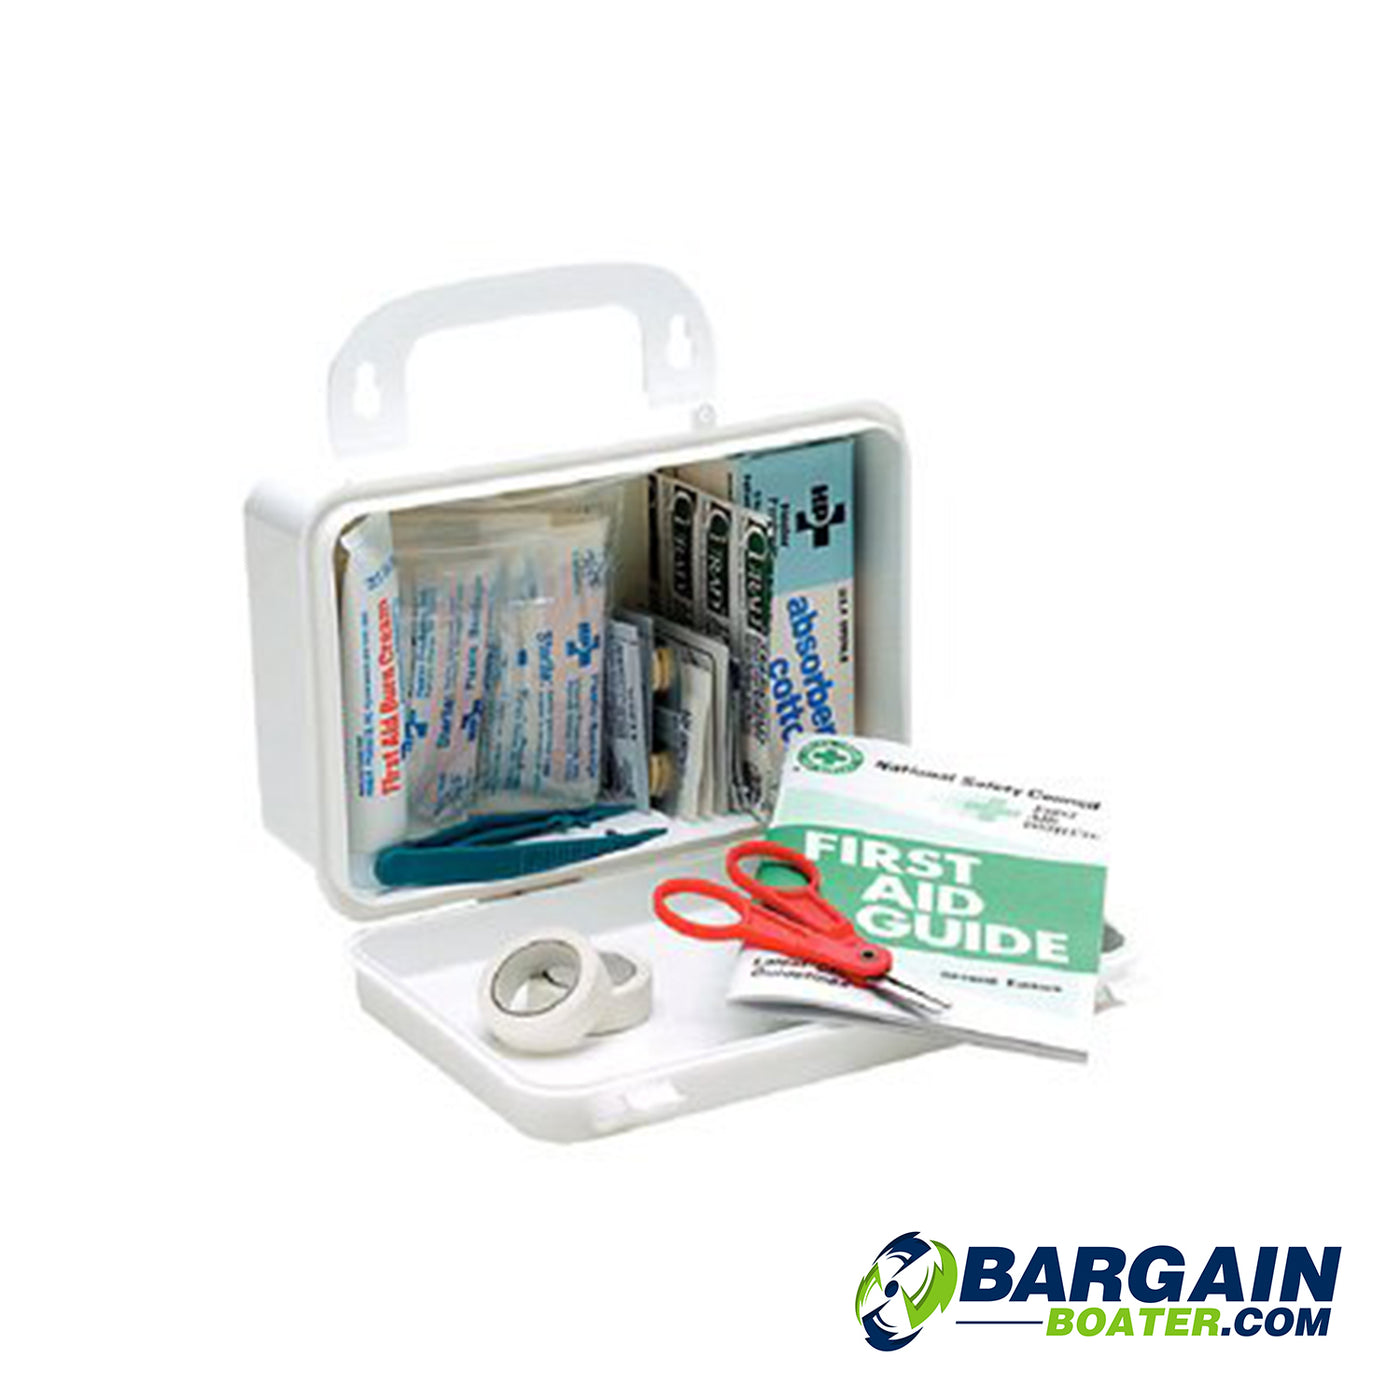 SeaChoice Deluxe First Aid Kit